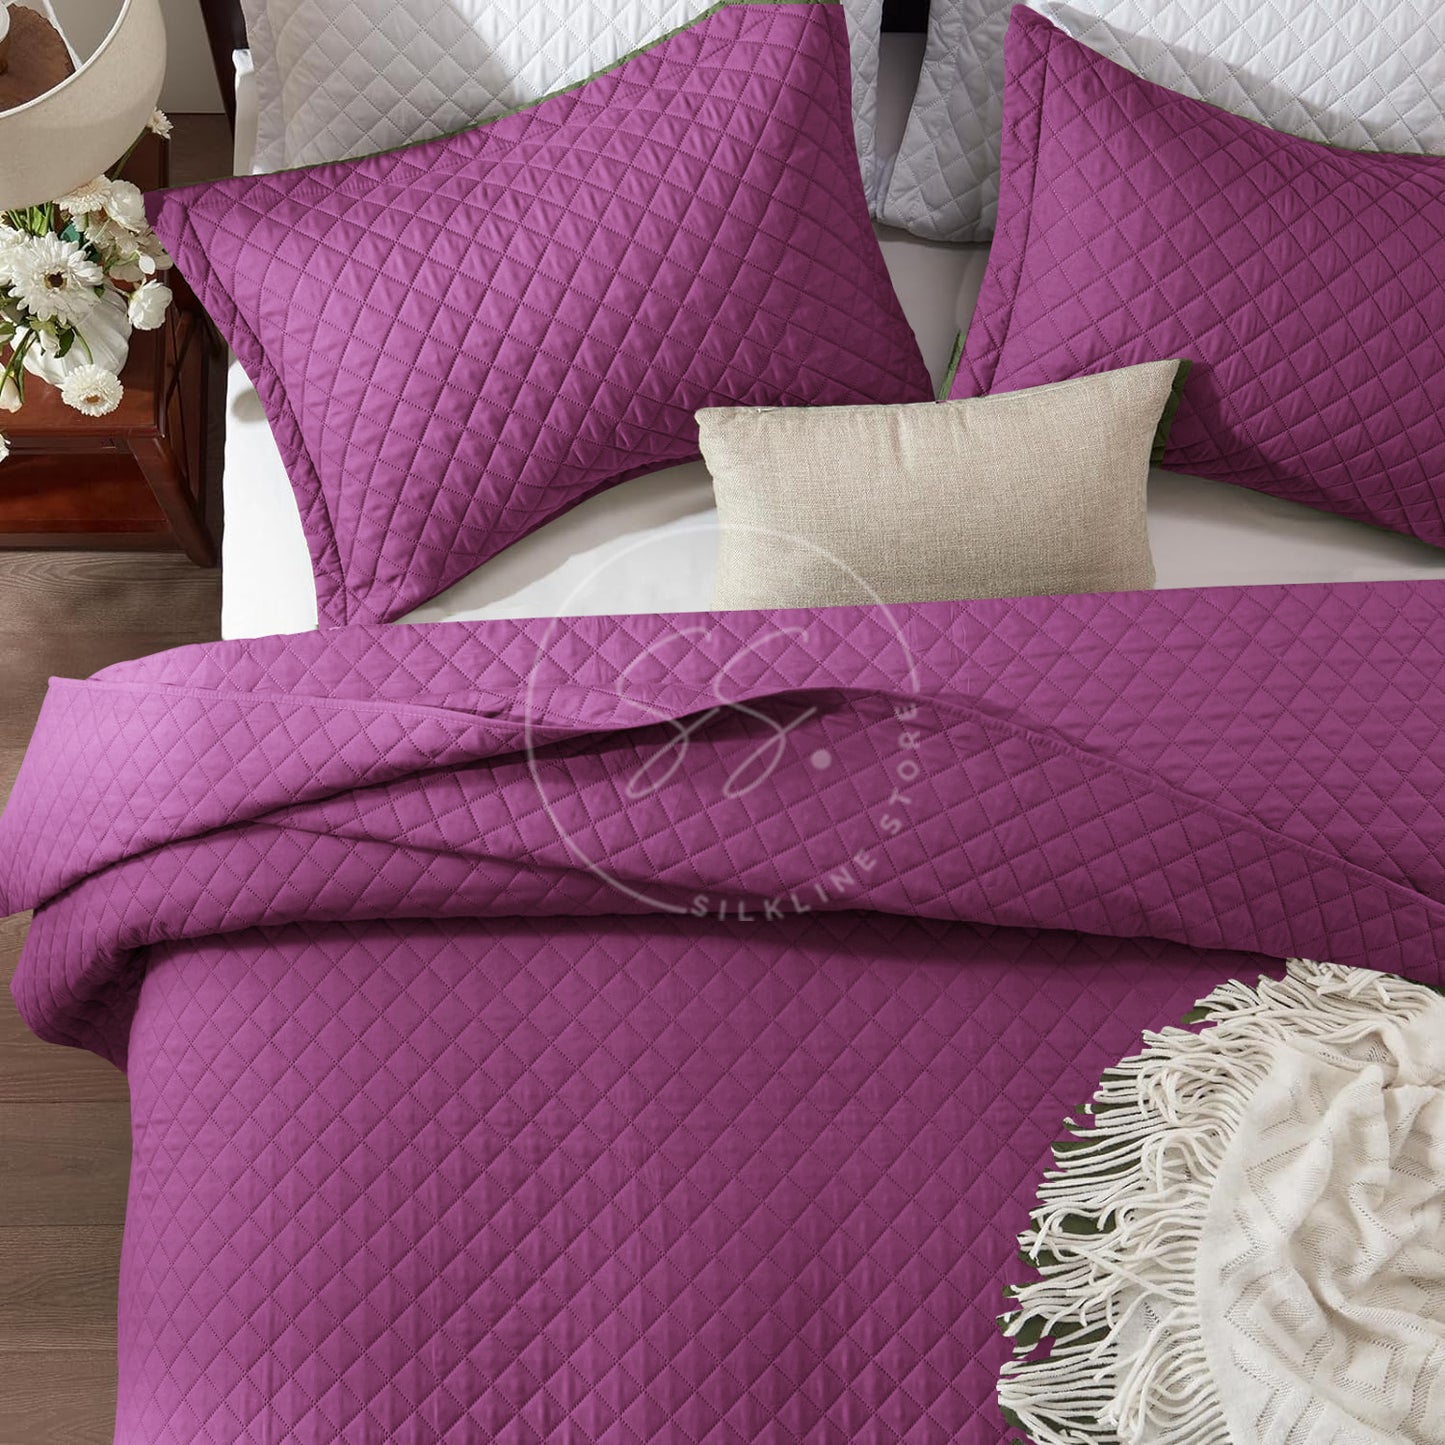 Lilac - king Size Microfibre: 3 pcs Quilted bedspread set